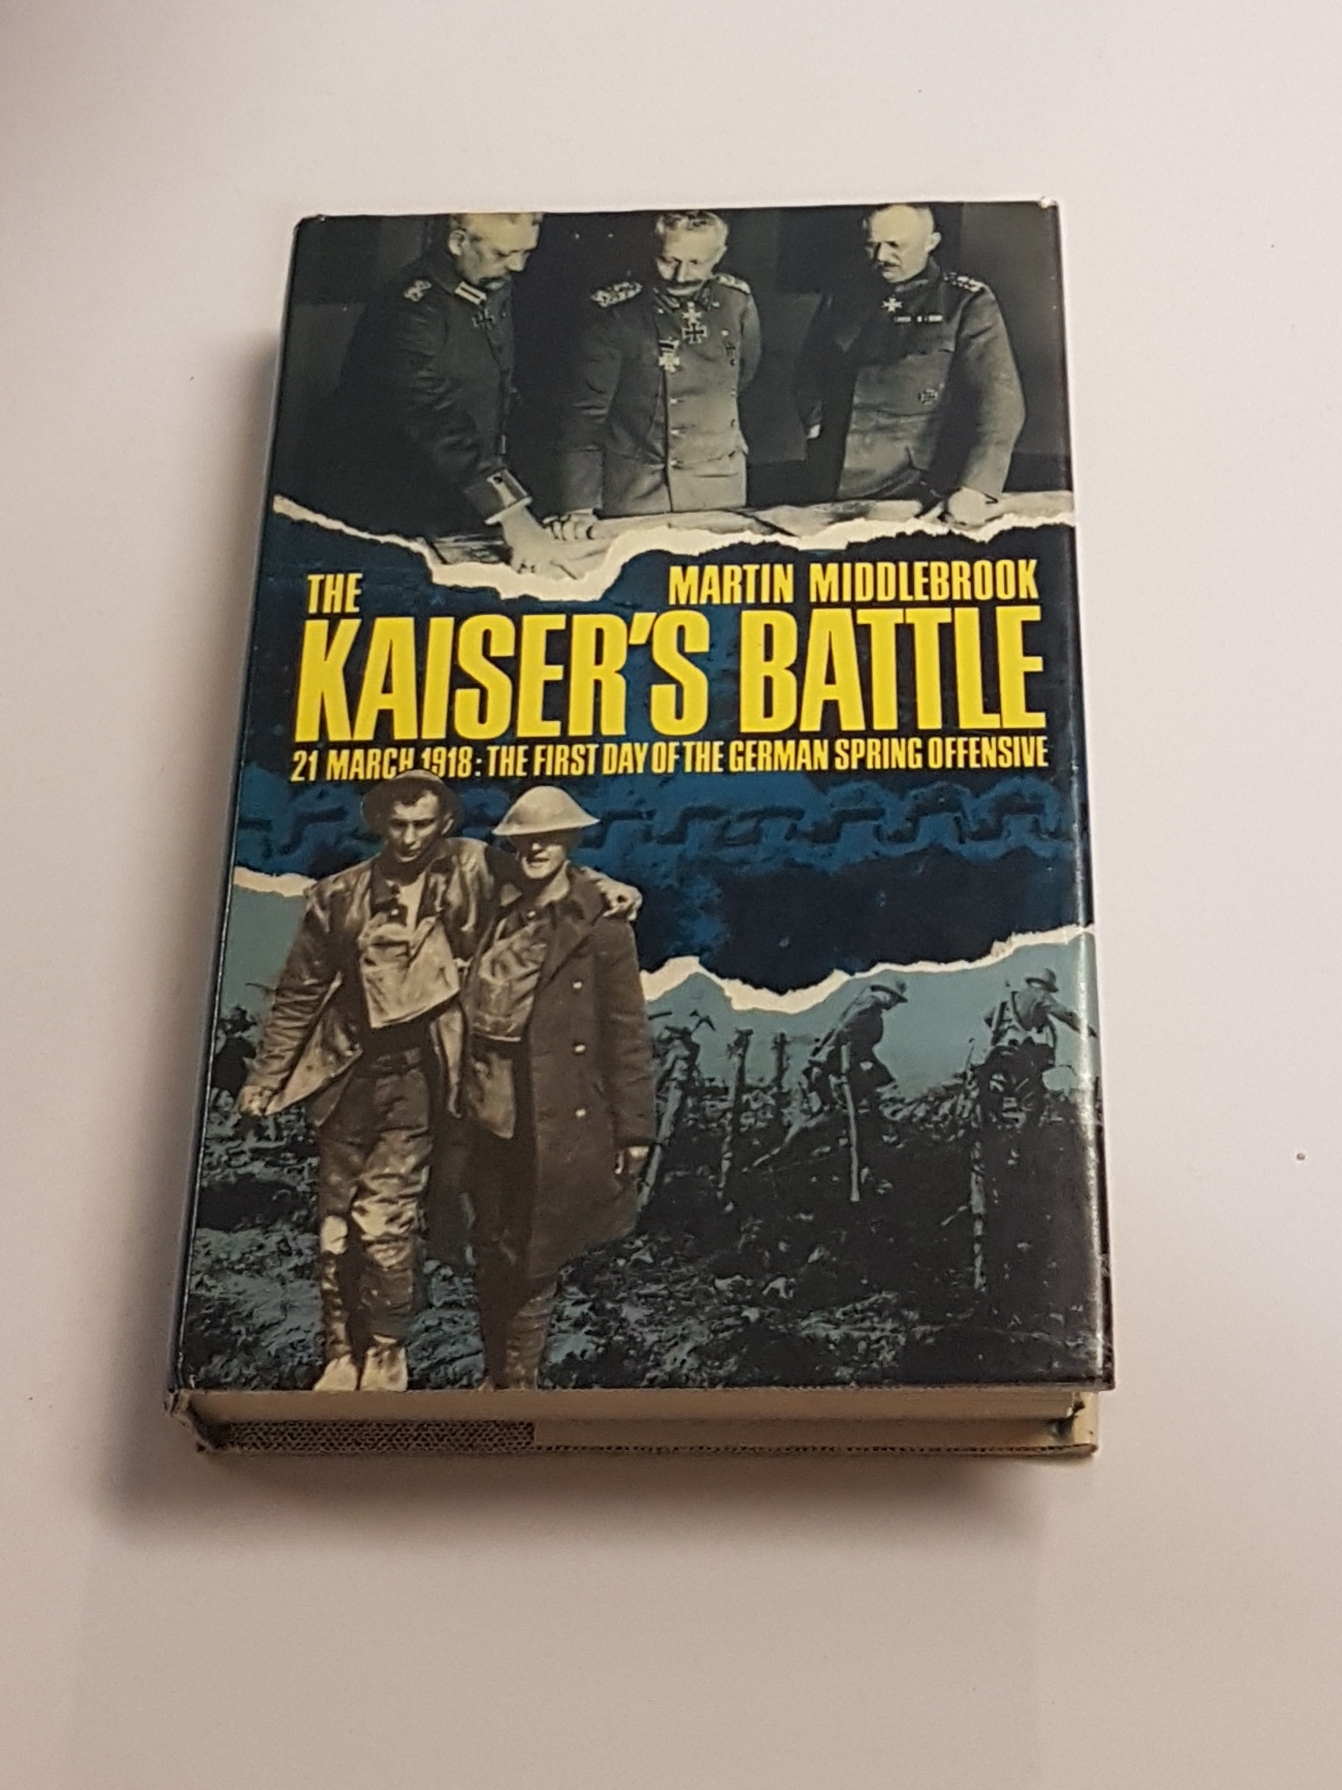 The Kaiser's Battle - 21 March 1918: The First Day of the German Spring Offensive - Middlebrook, Martin